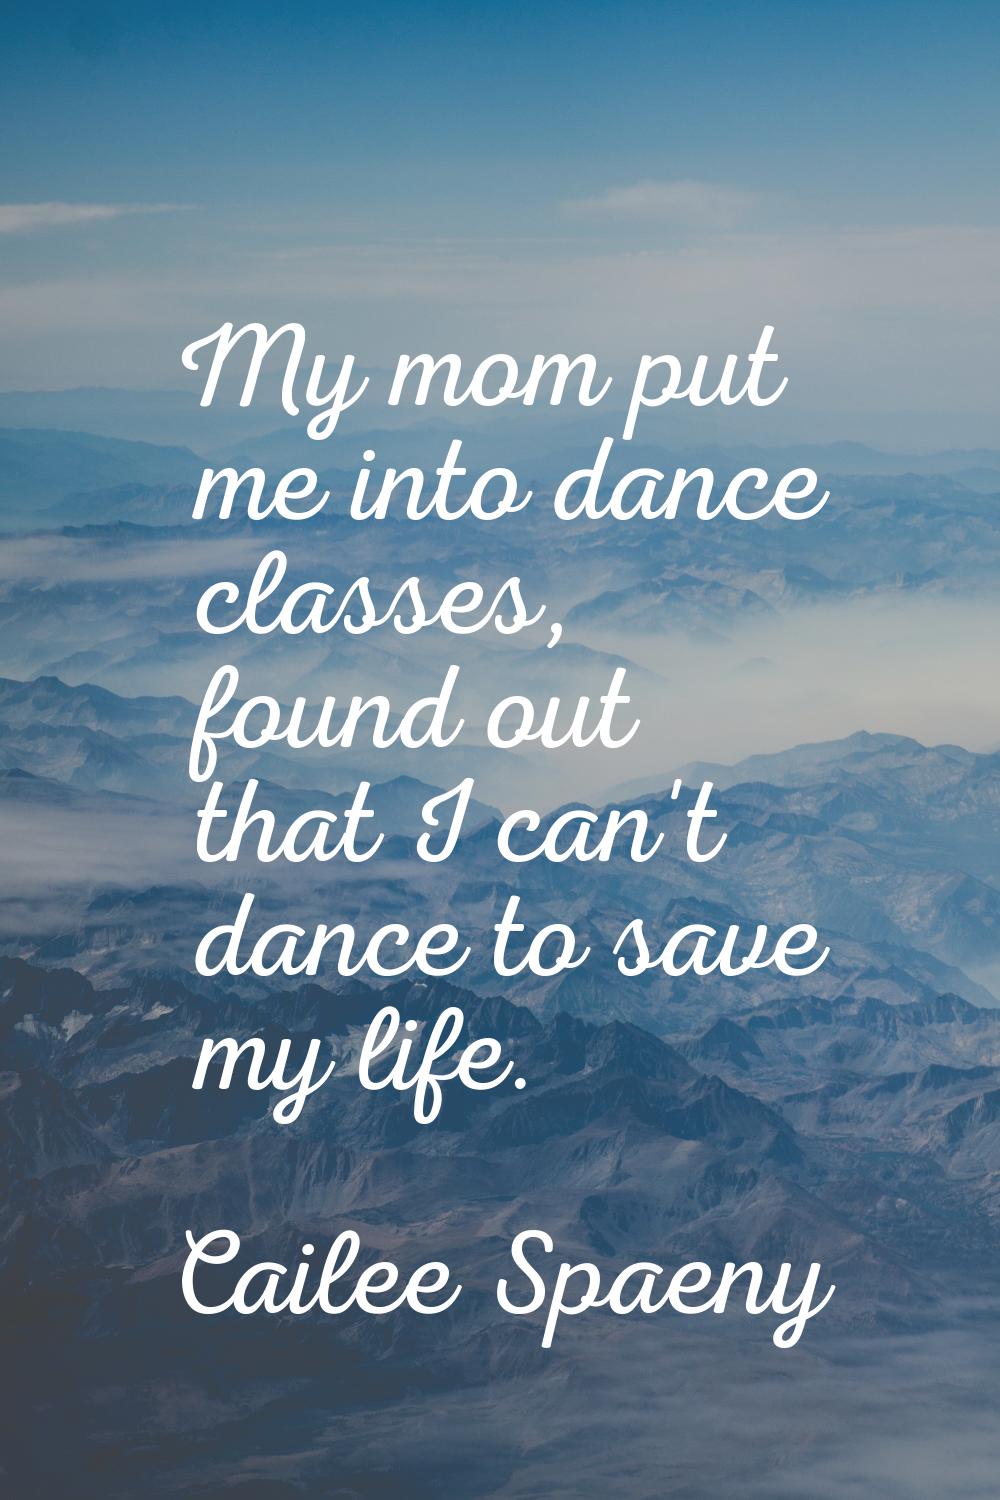 My mom put me into dance classes, found out that I can't dance to save my life.